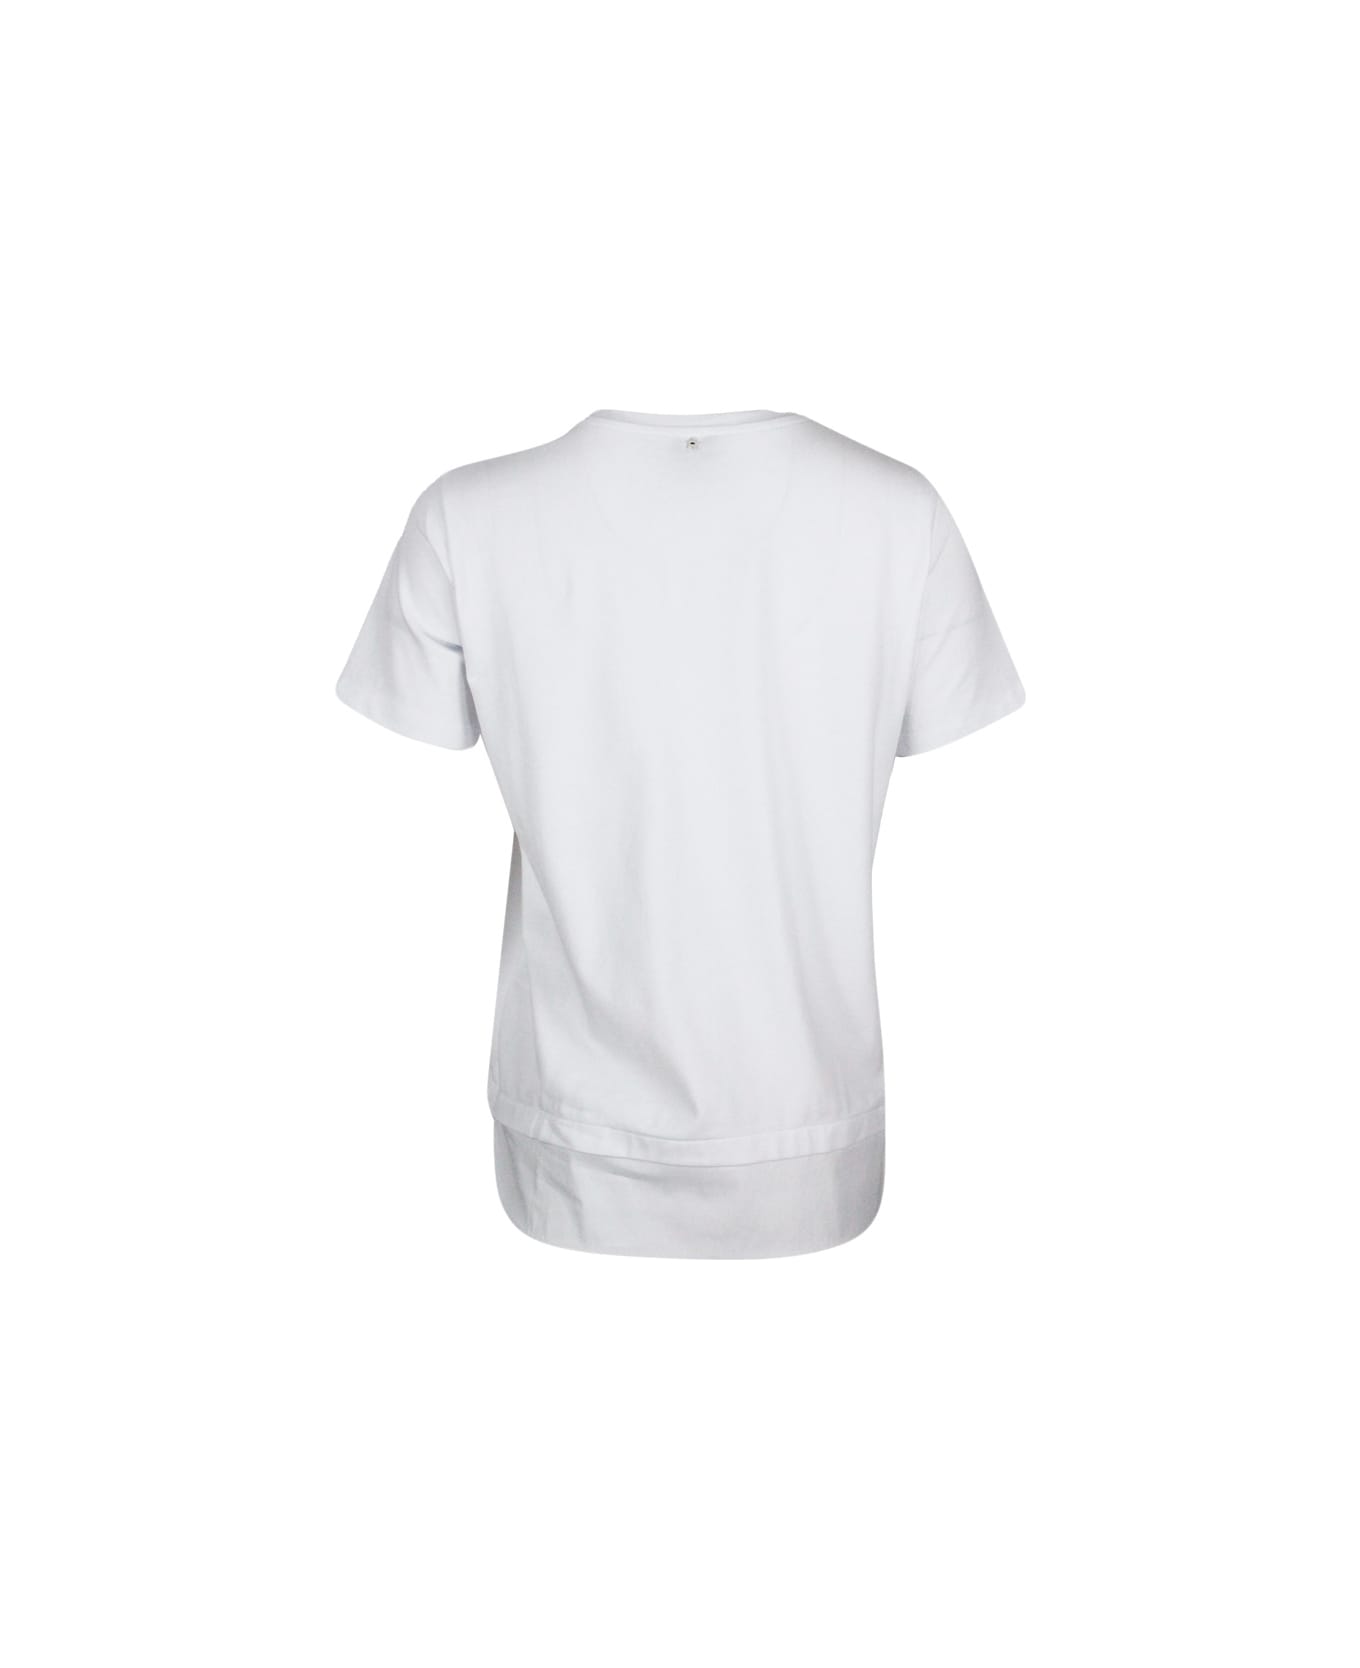 Lorena Antoniazzi Short-sleeved Round-neck Cotton zip-up T-shirt With Chest Pocket And Embroidered Star - White